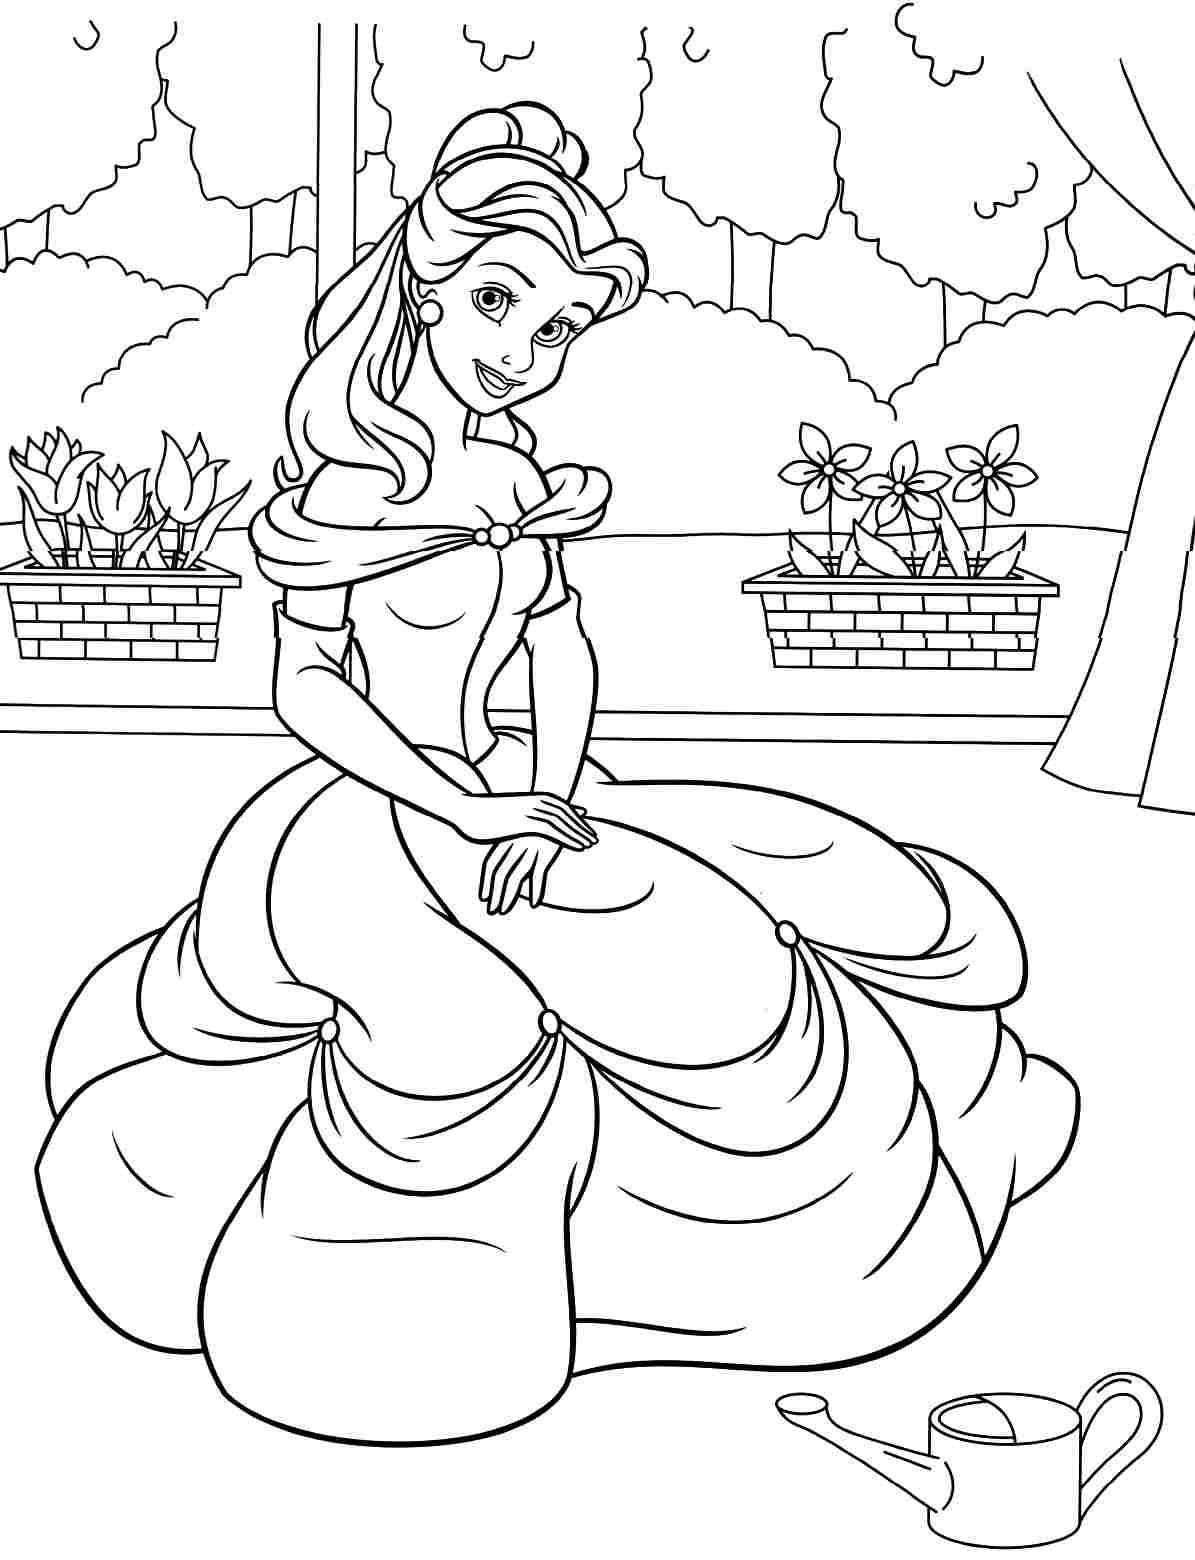 Printable Disney Coloring Pages Free